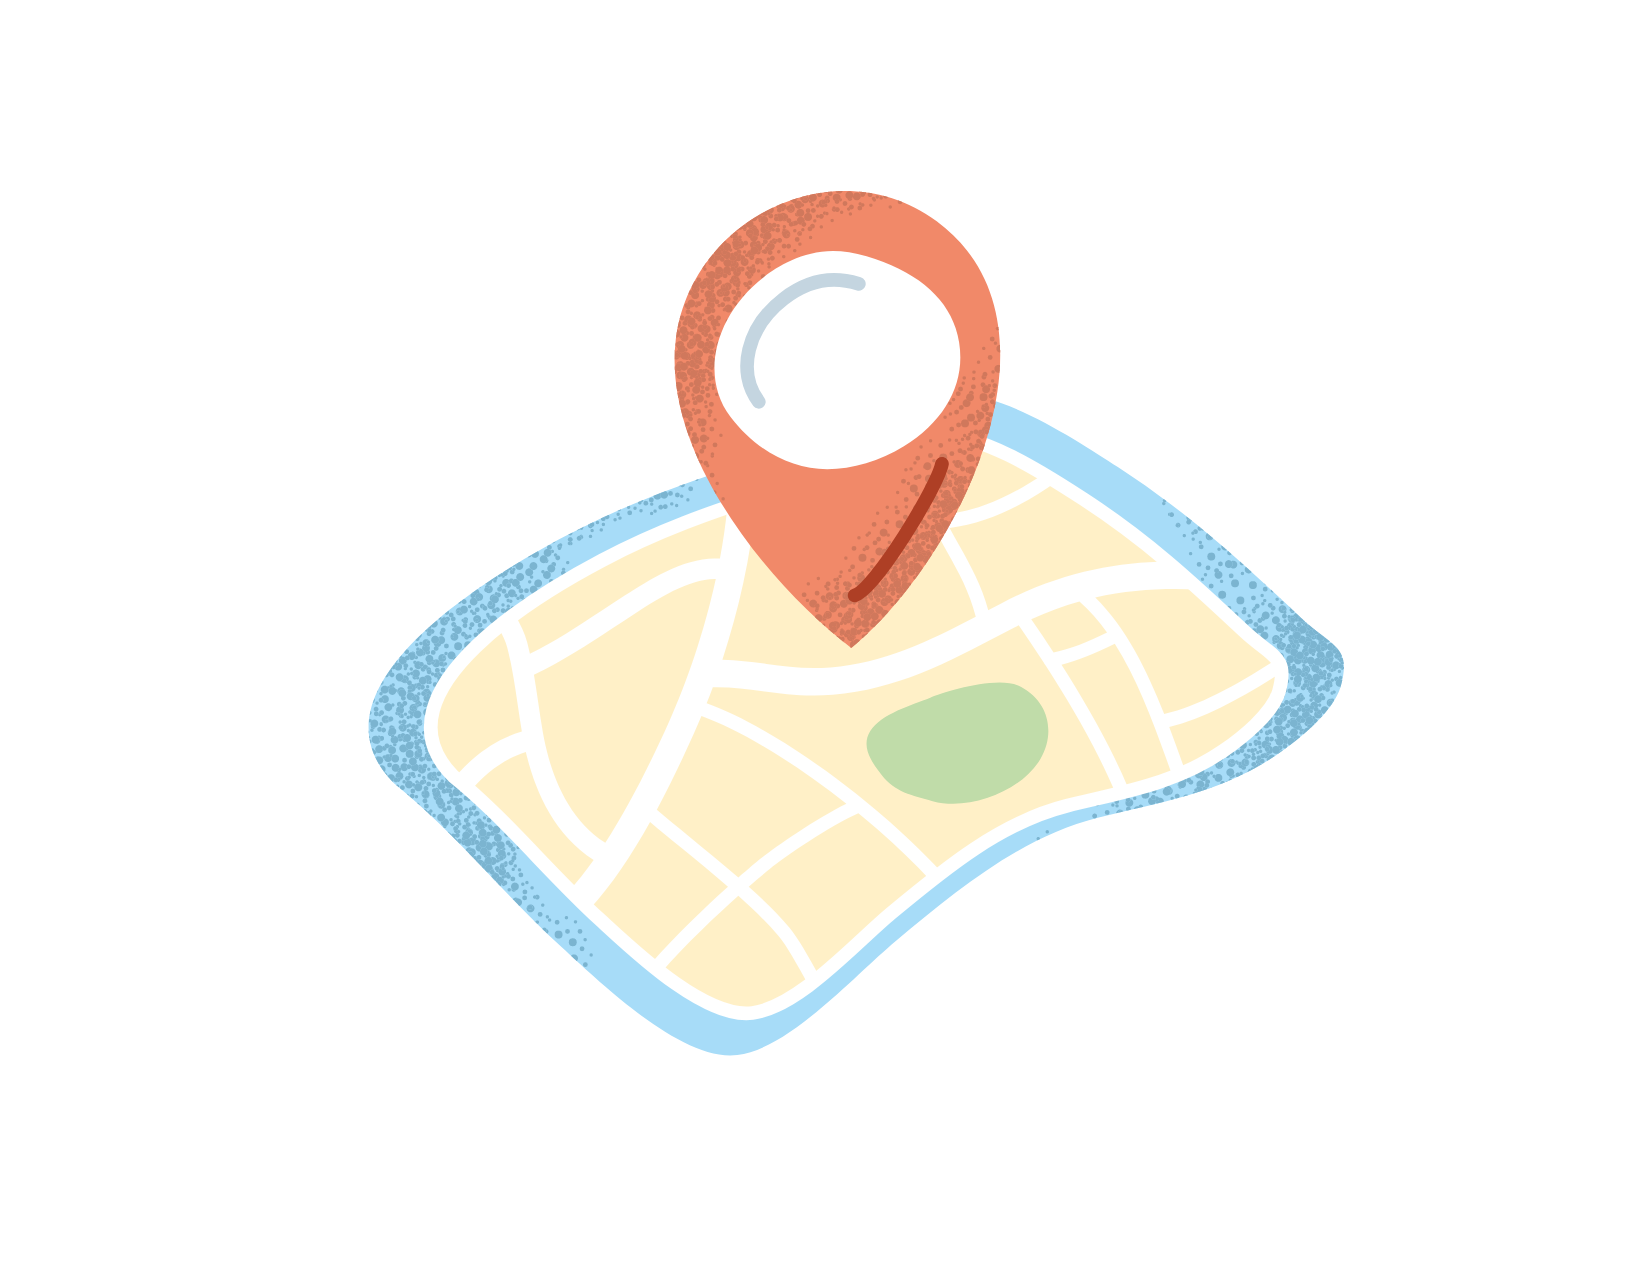 illustrated image of a location pin being placed onto a map